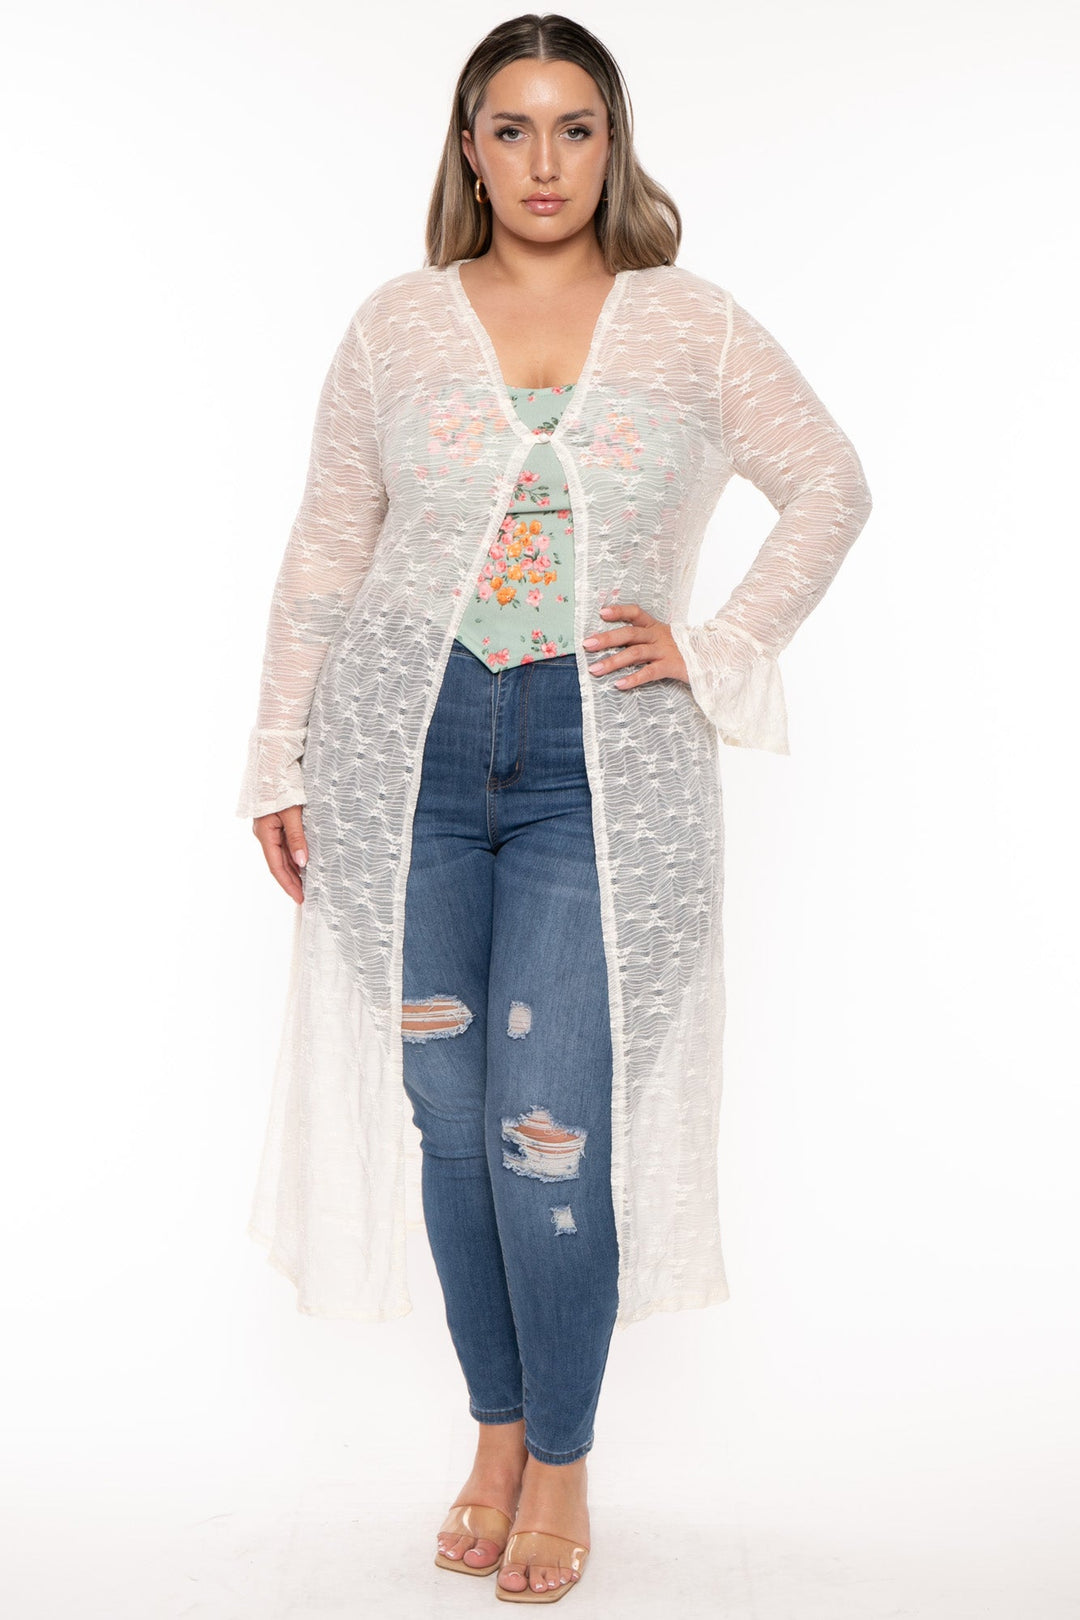 CULTURE CODE Tops Plus Size Scarlet Lace Flare Duster  - Ivory